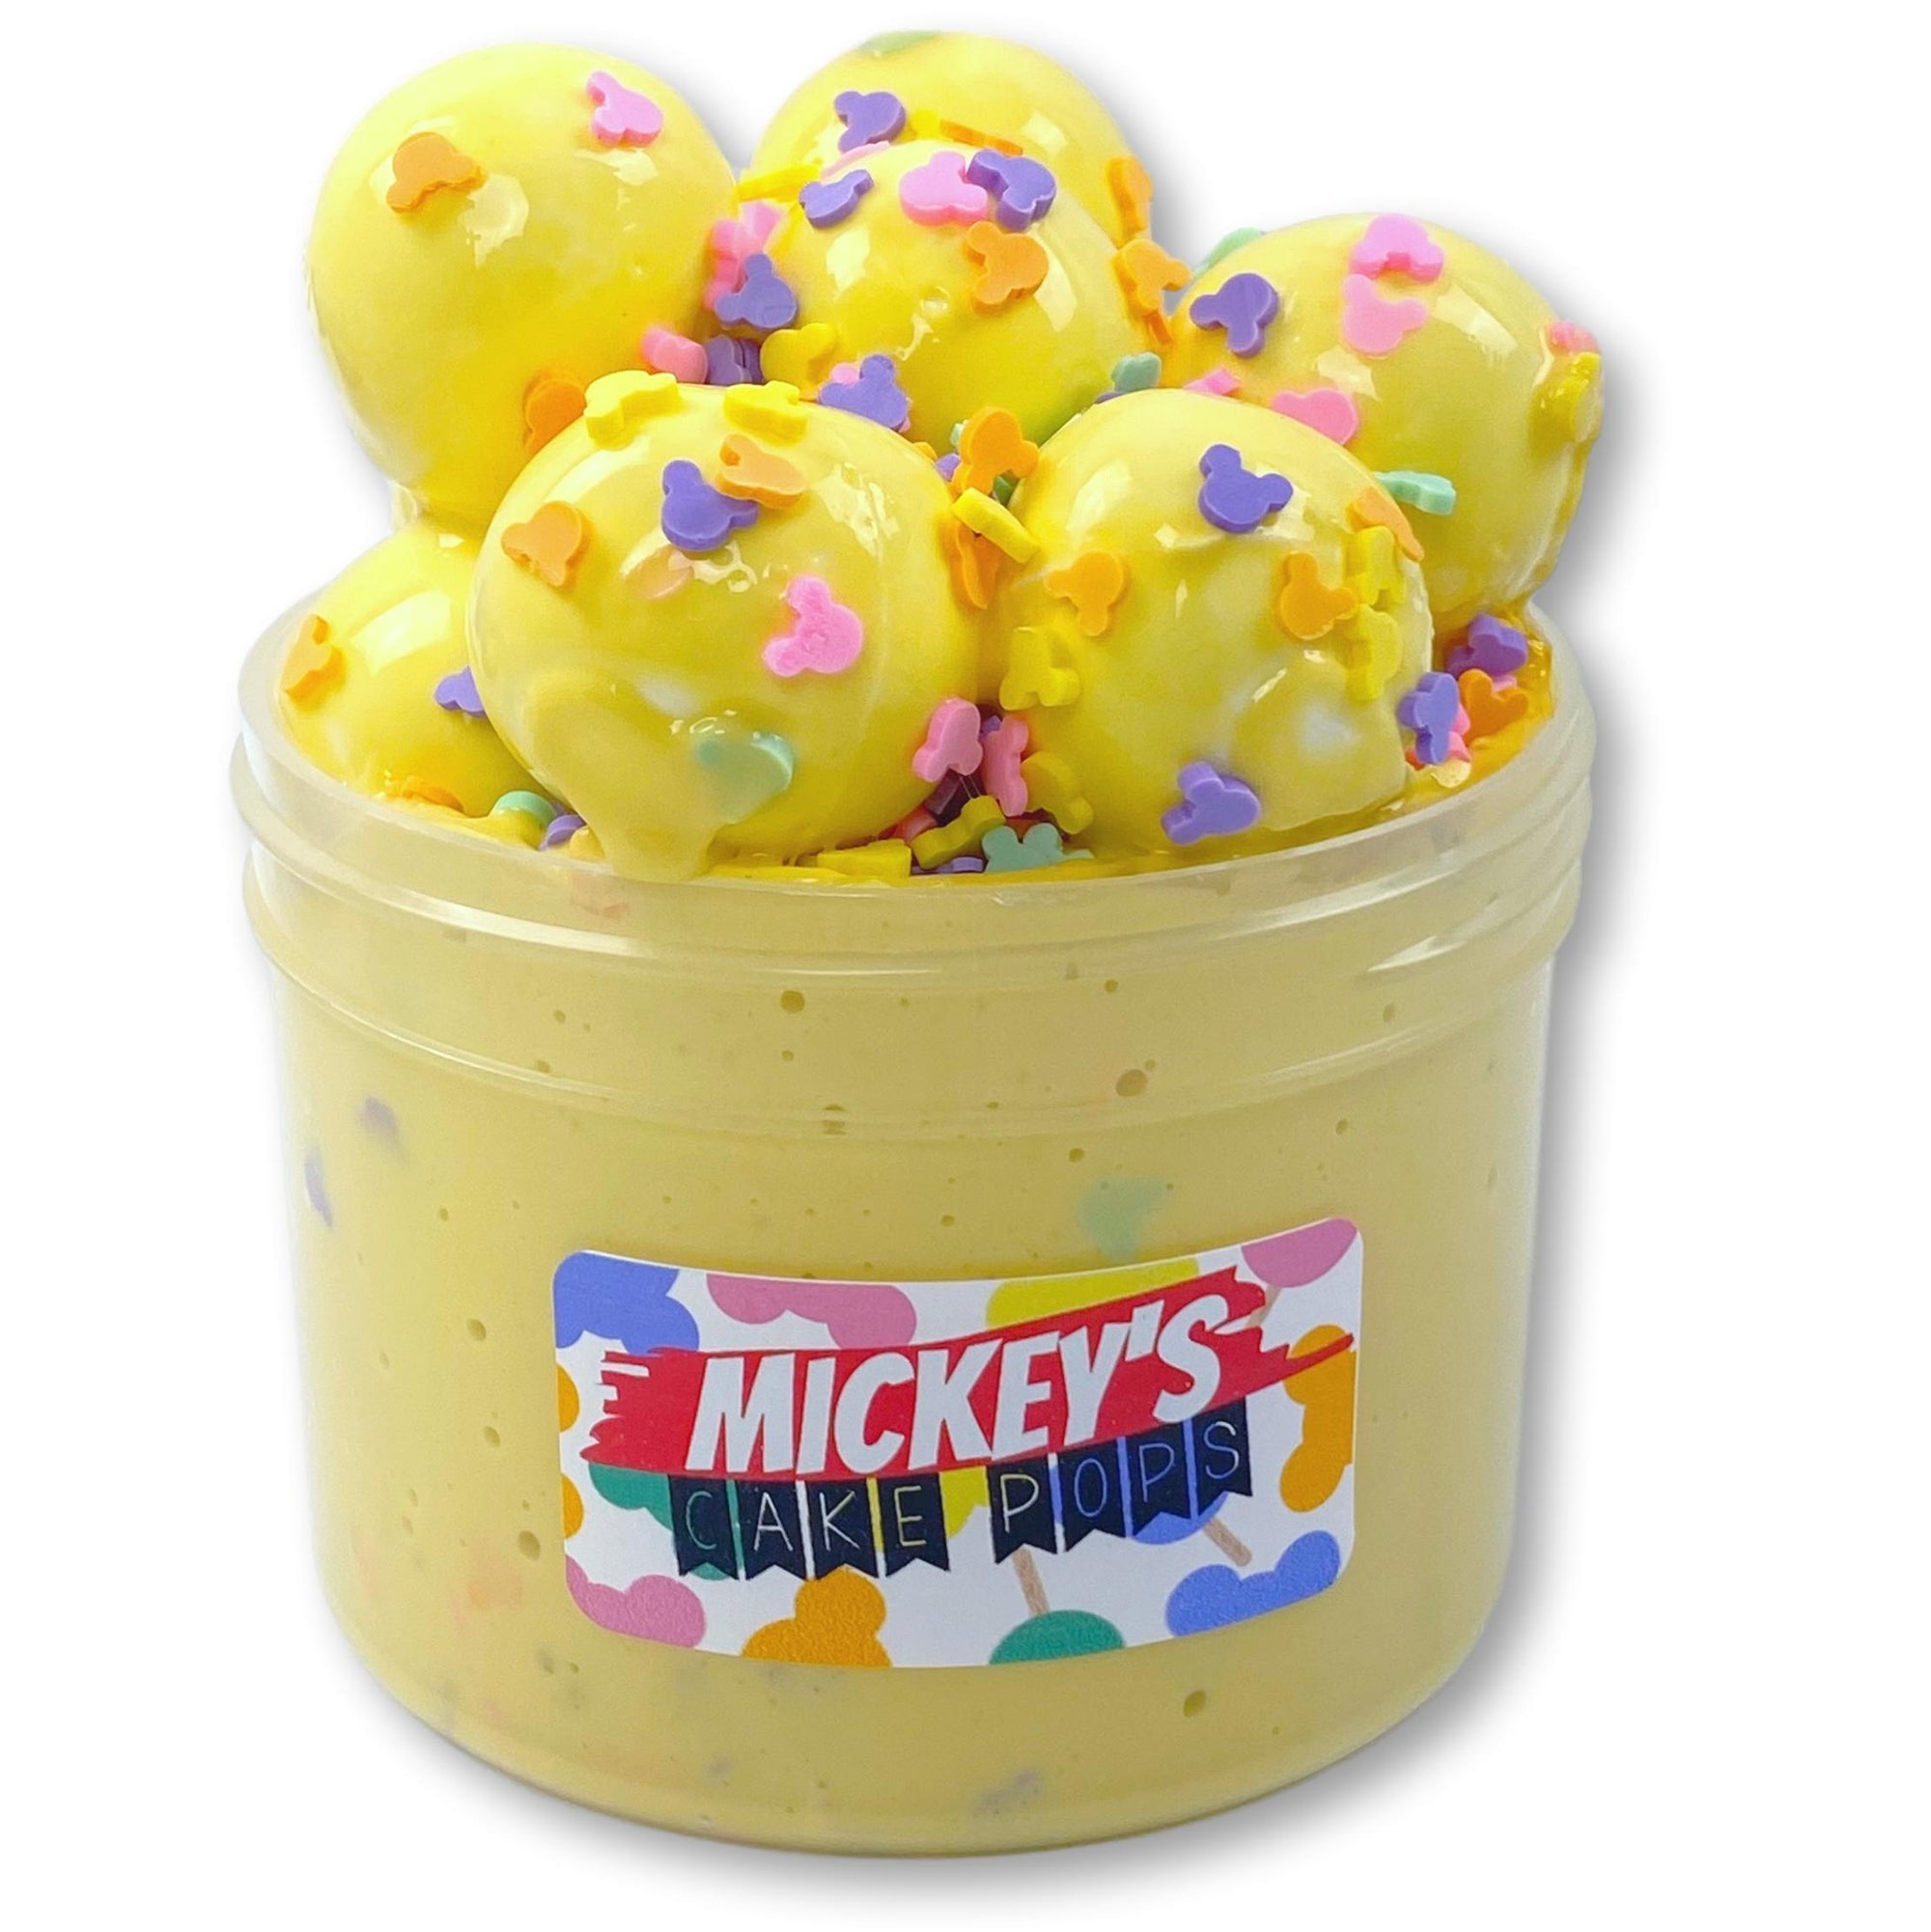 Mickey's Cake Pops Thick and Glossy Slime - Shop Slime - Dope Slimes 